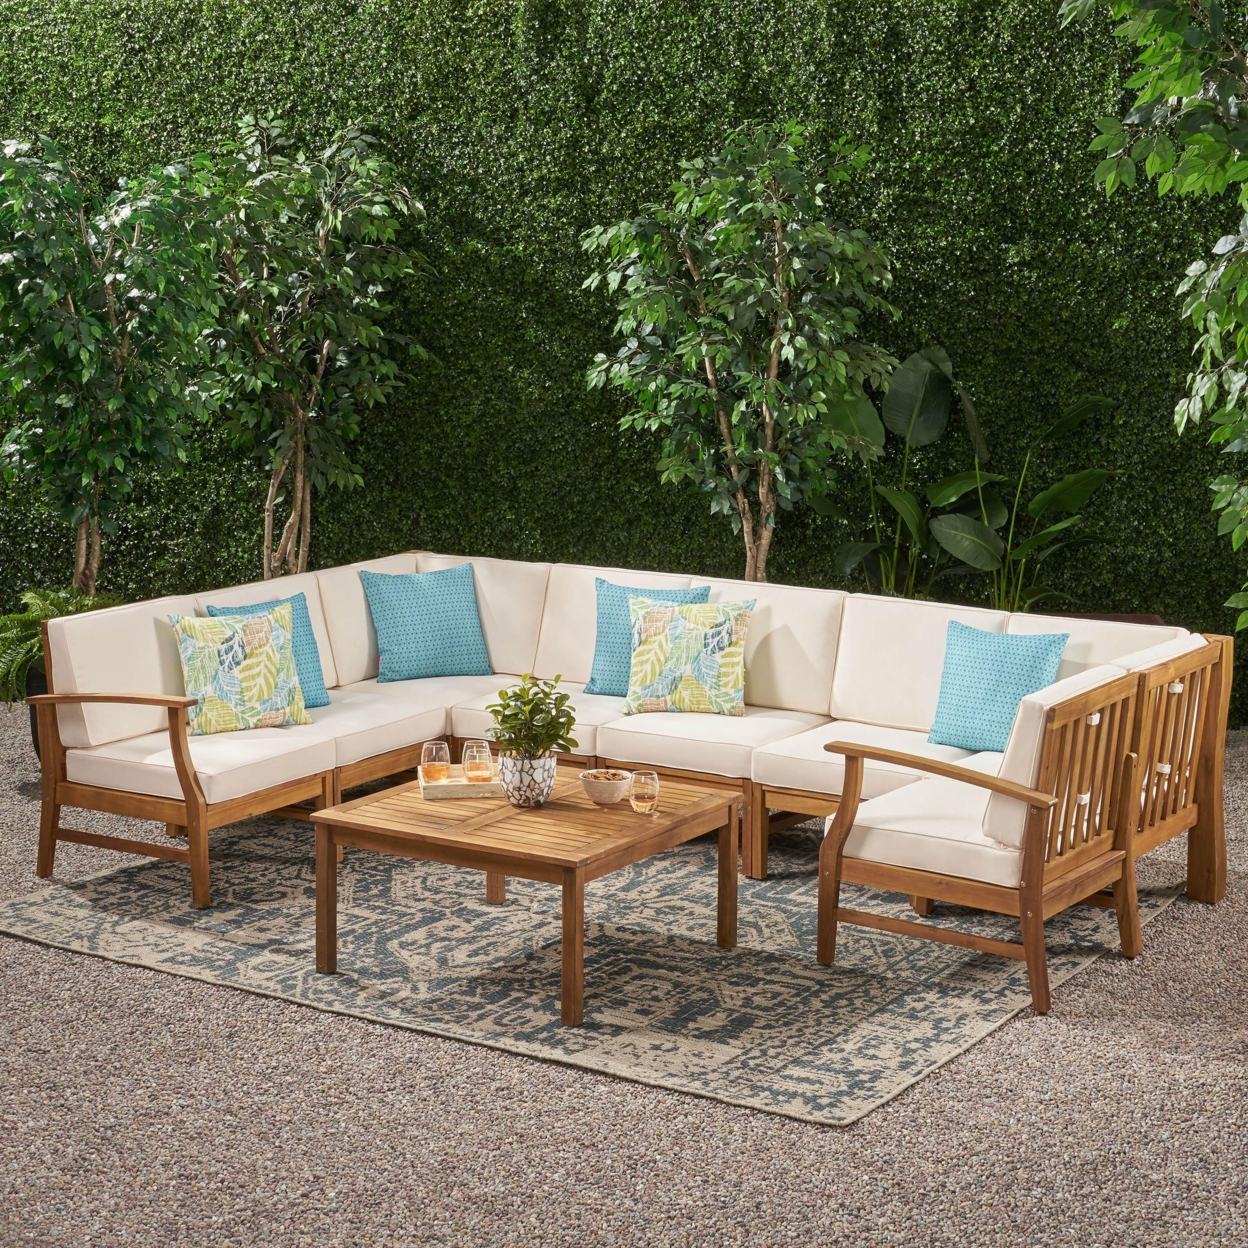 Scarlett Outdoor 8 Seat Teak Finished Acacia Wood Sectional Sofa And Table Set - Cream